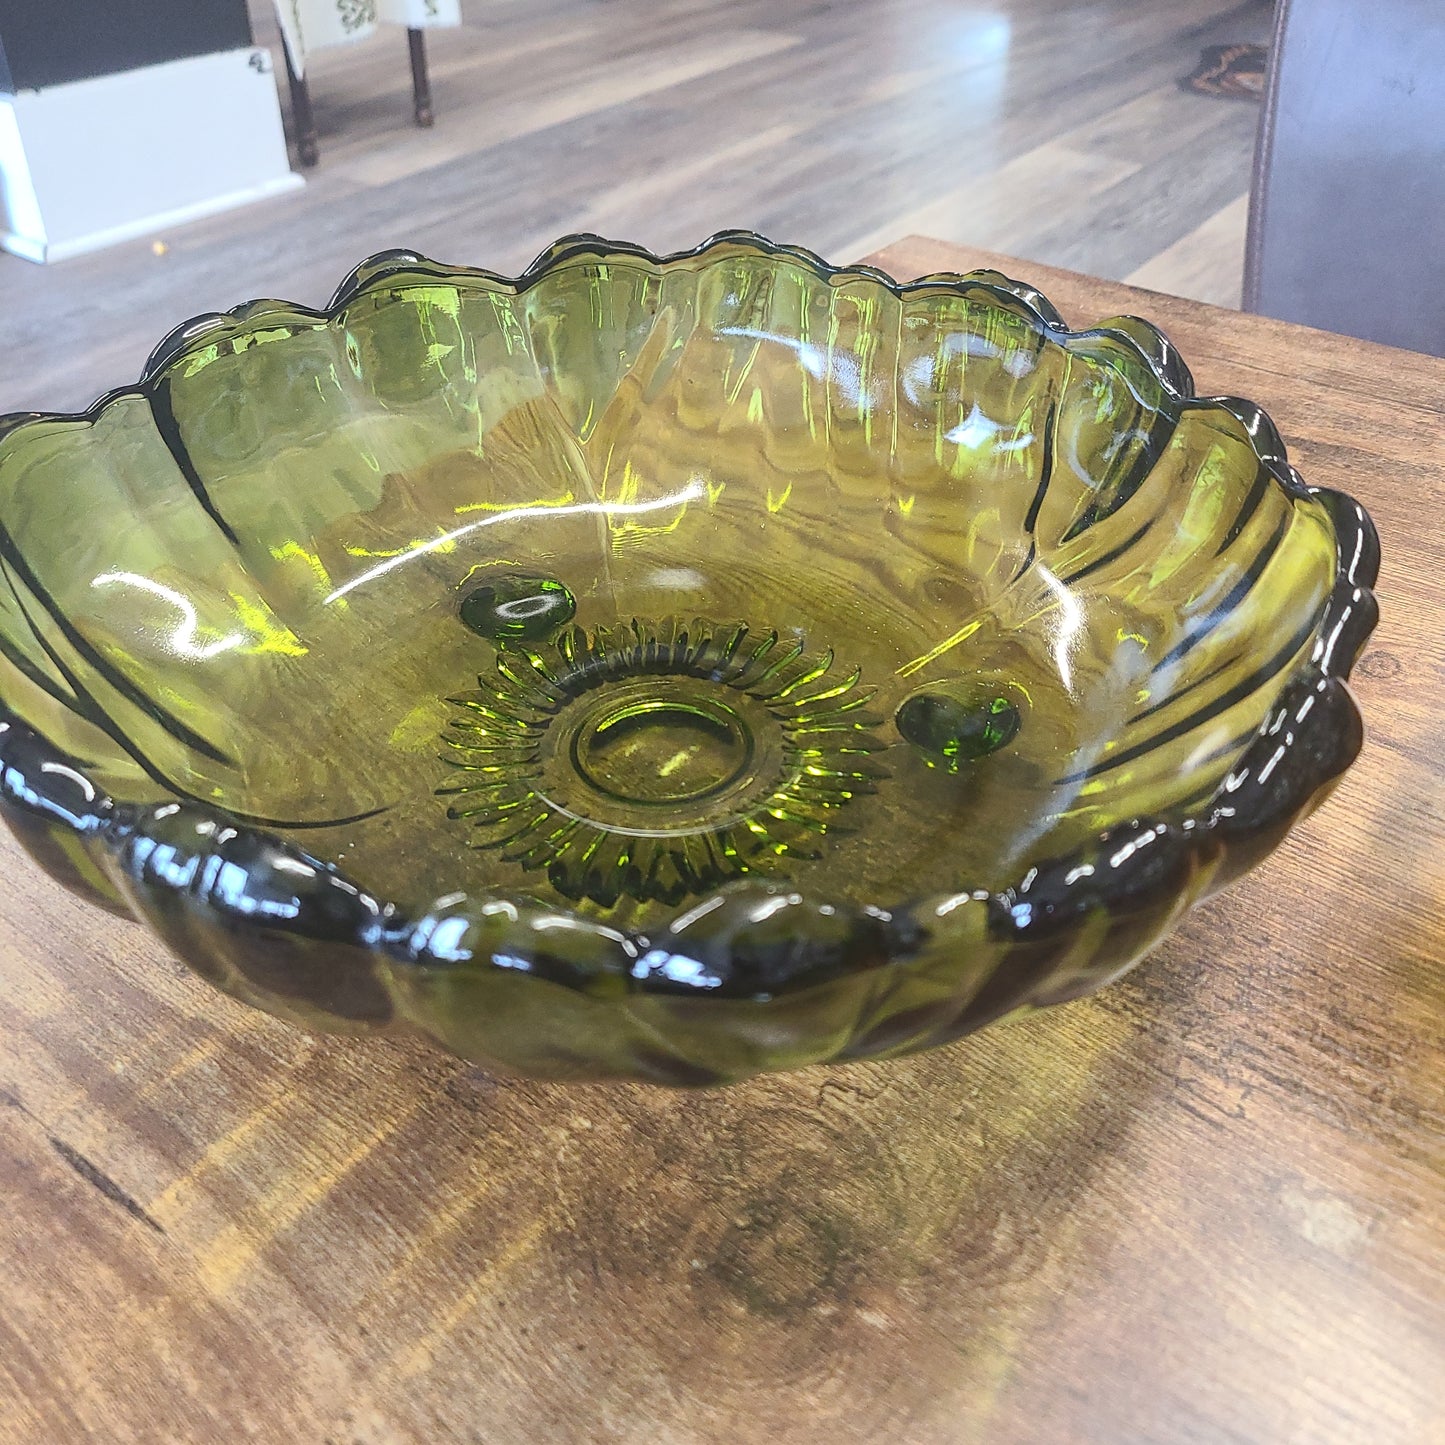 Vintage indiana bowl - Classic & Kitsch